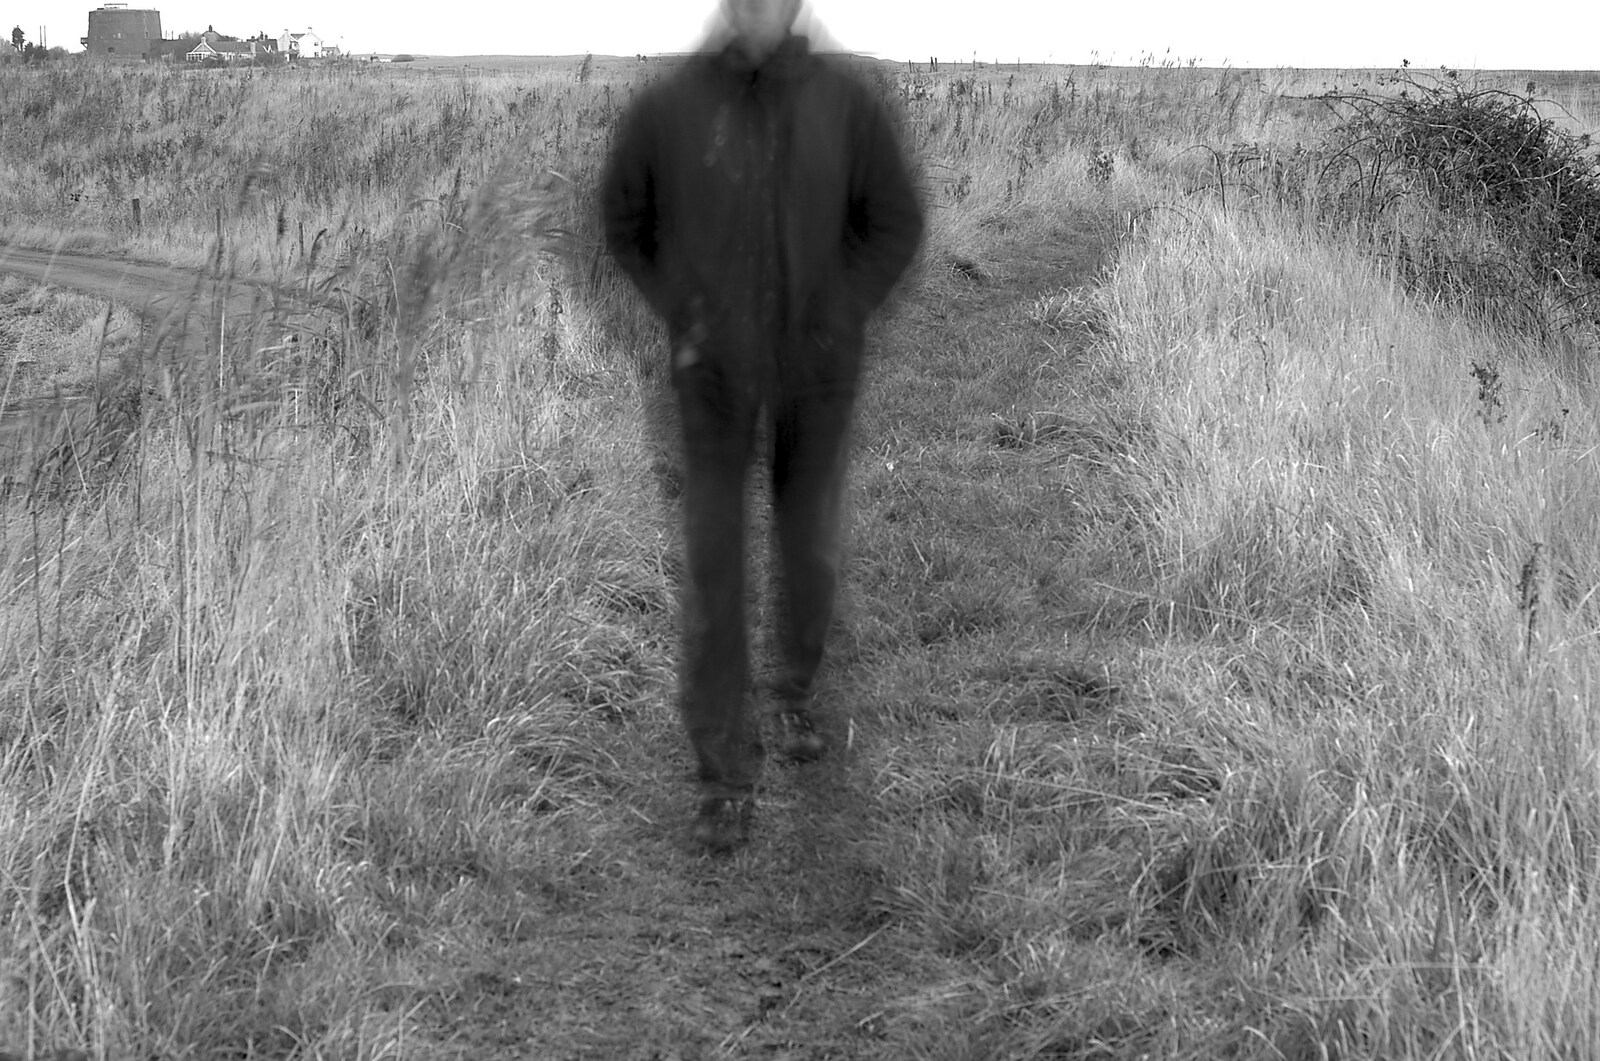 The ghost of DH roams along the footpath from A Trip to East Lane, Bawdsey, Suffolk - 28th November 2004